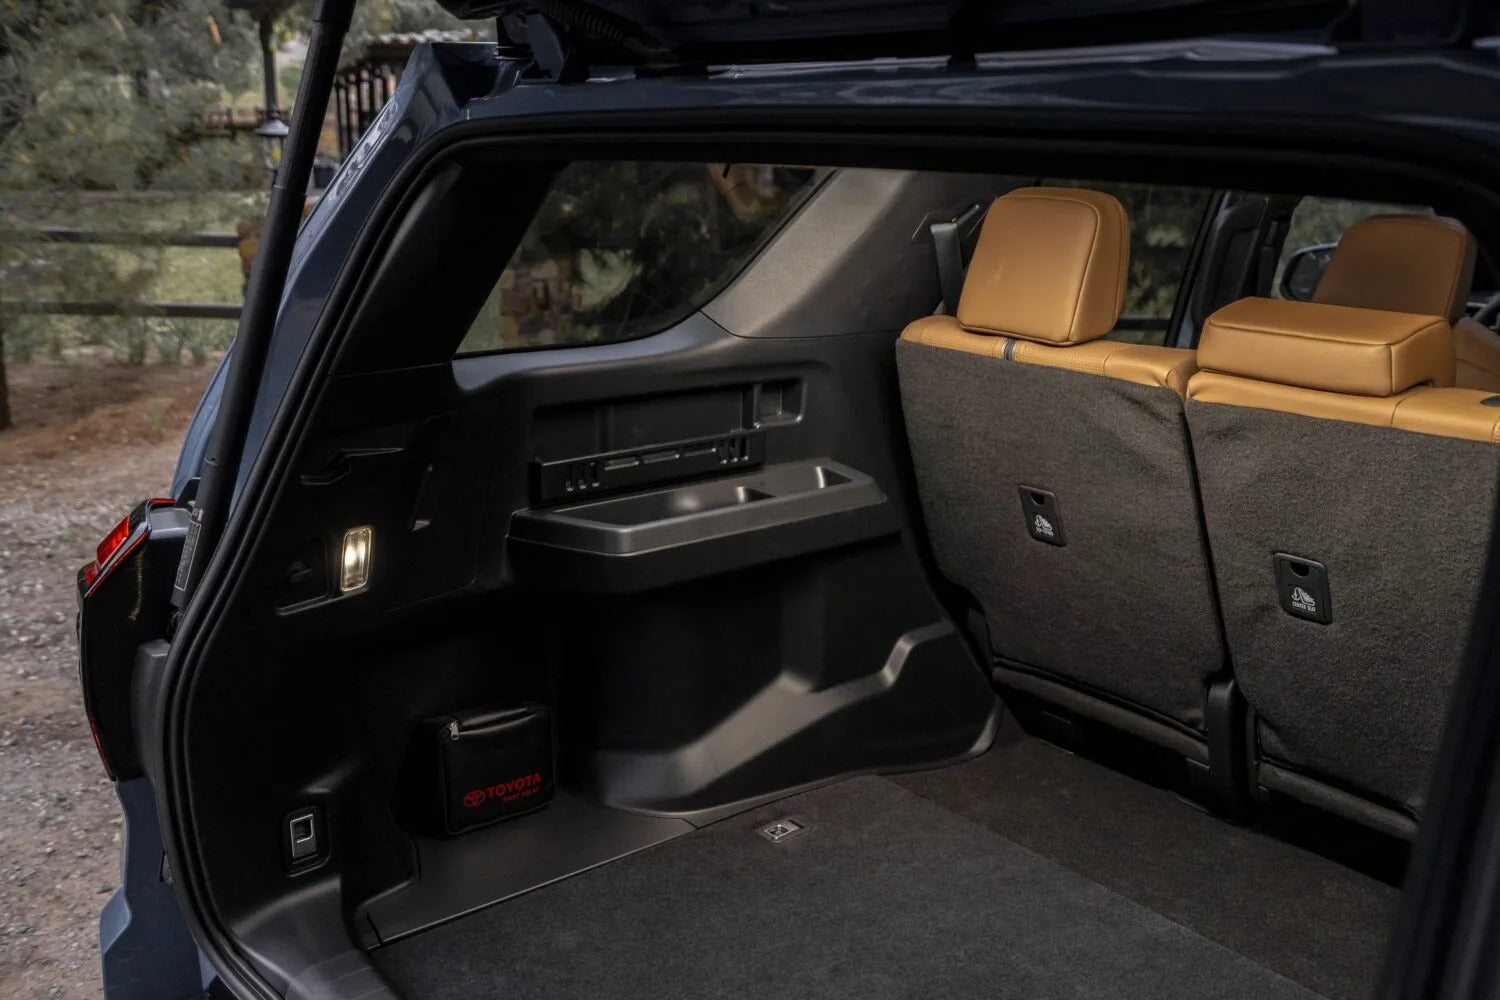 The 6th Generation Toyota 4Runner The trunk